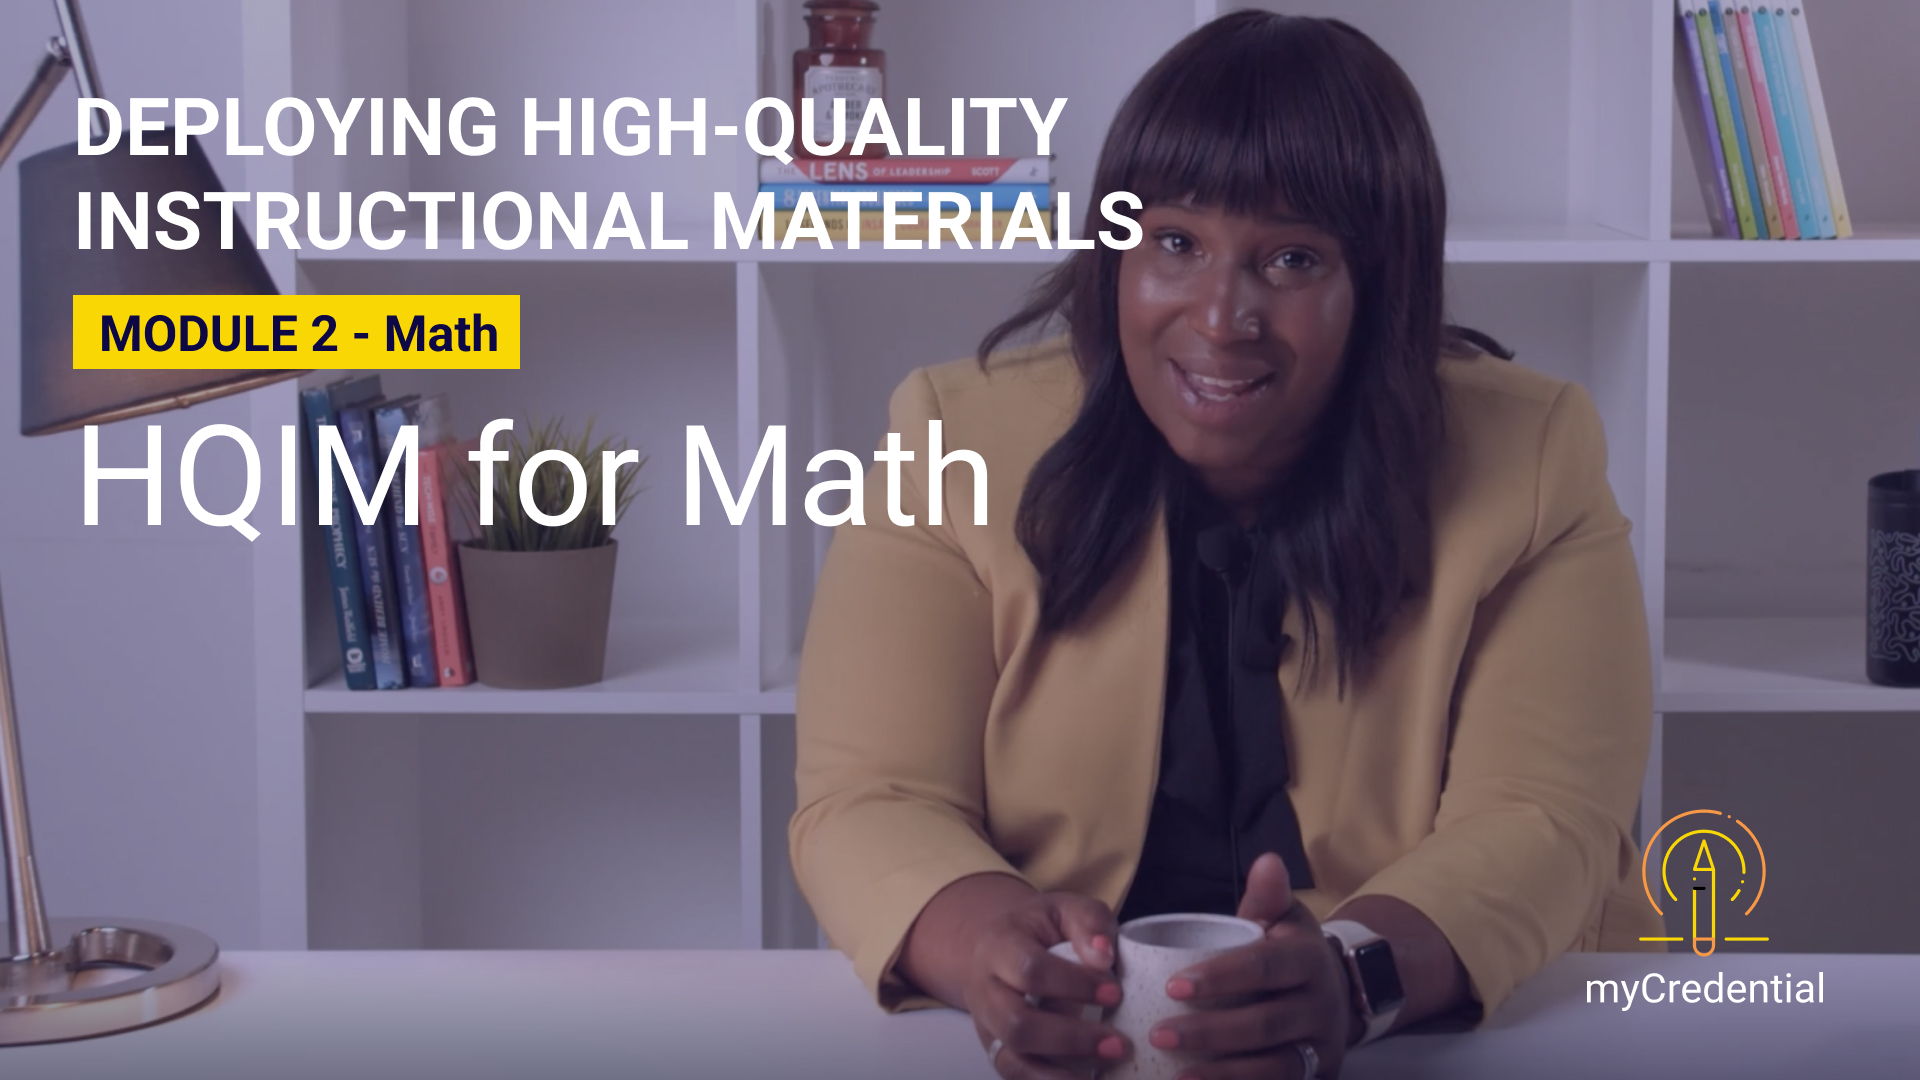 Deploying High-Quality Instructional Materials (Module 2a): HQIM for Math